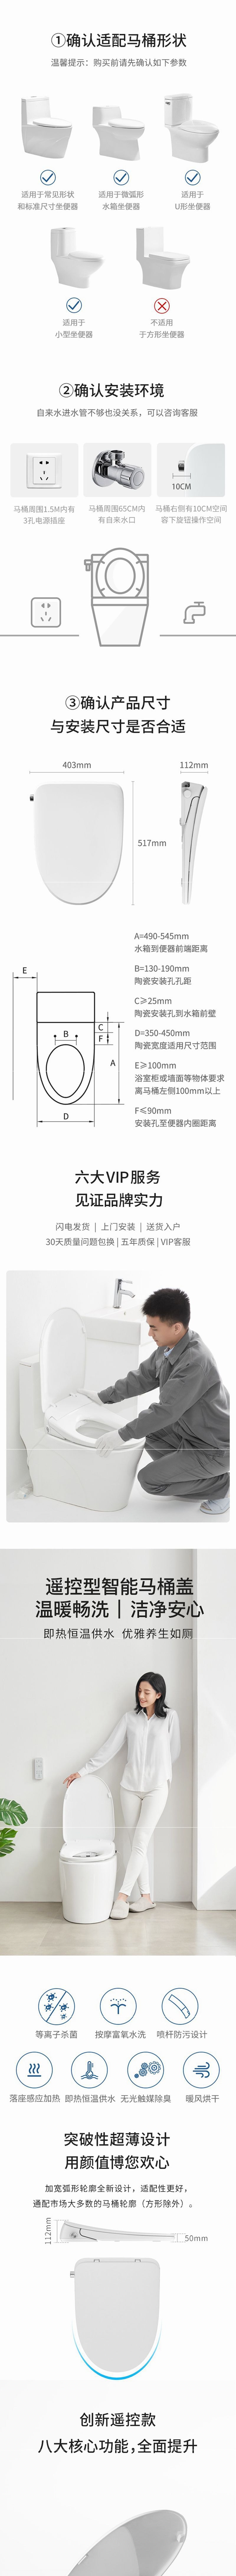 Lifease Bidet Toilet Seat Slim Design Instant Heating Smart Bidet Self Cleaning Stainless Nozzle Heated Seat Warm Ai